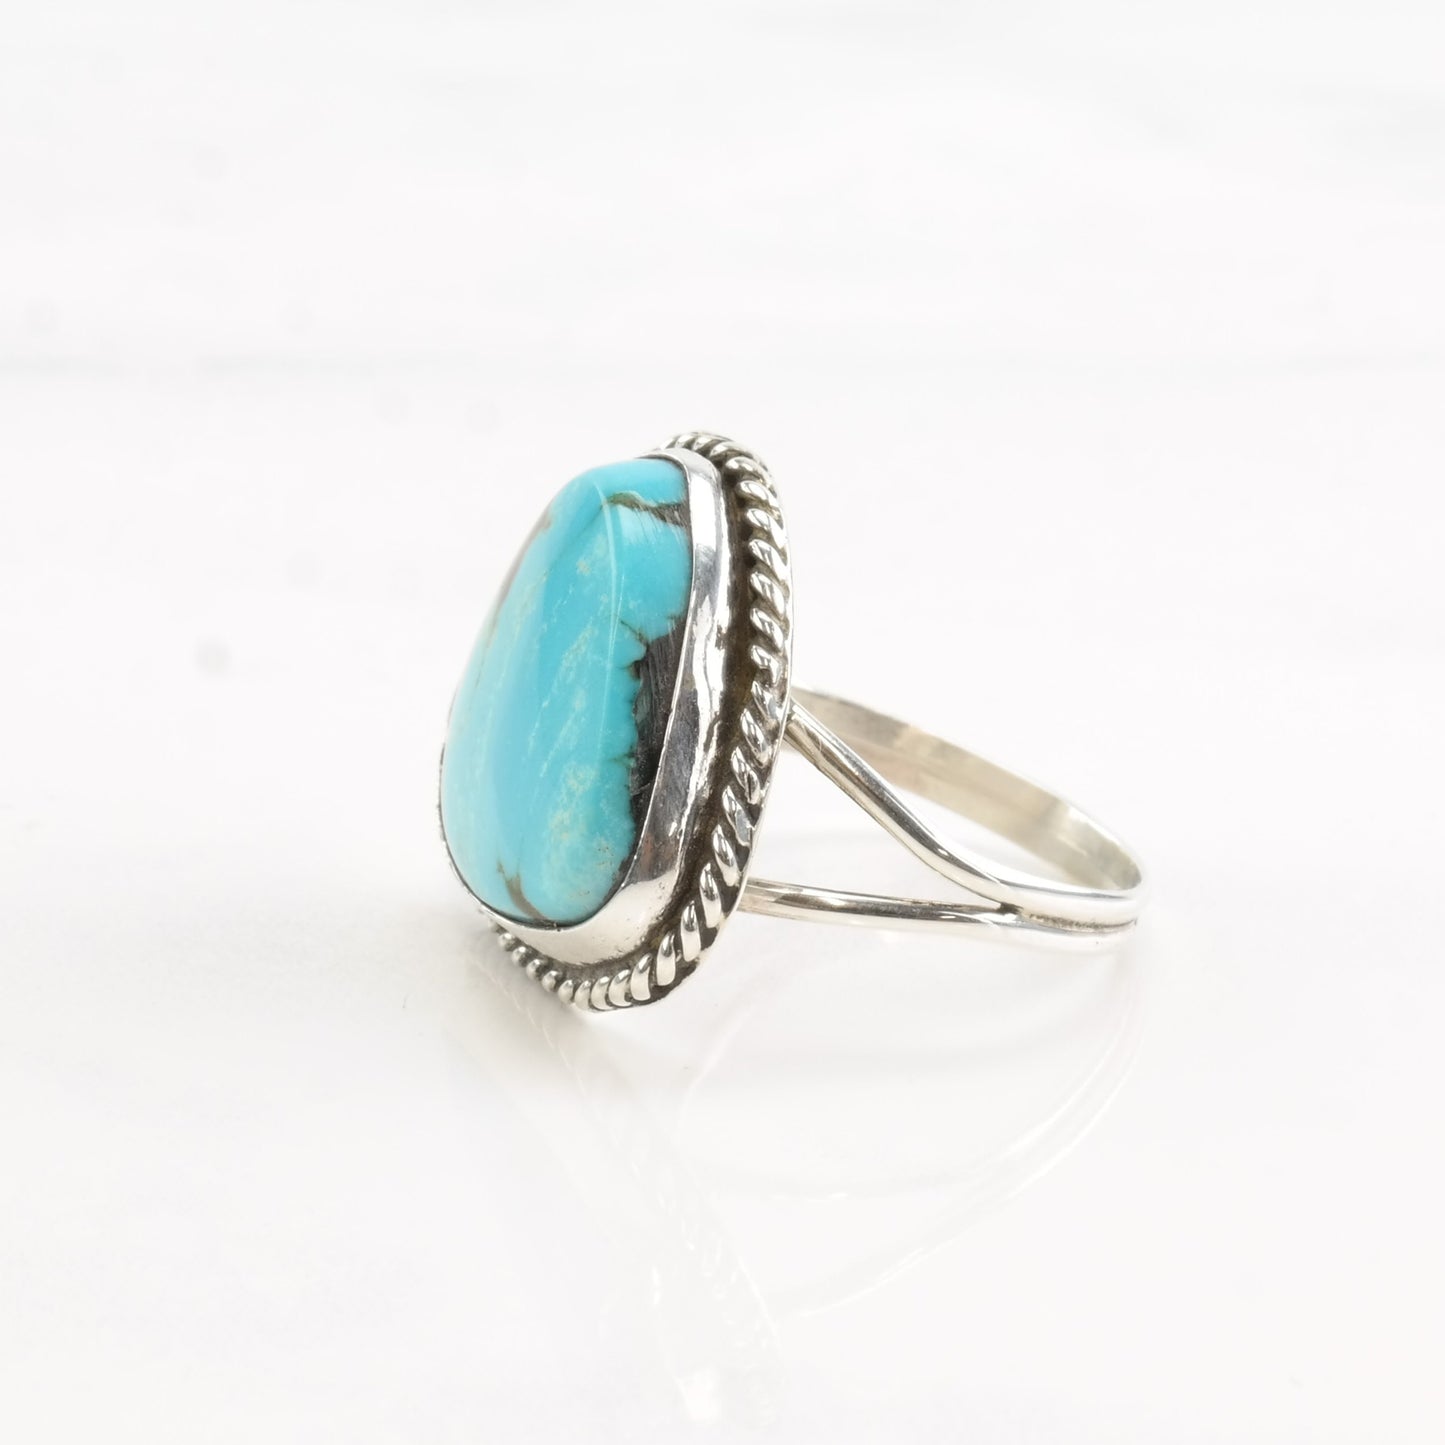 Vintage Southwest Silver Ring Turquoise Triangle Sterling Size 8